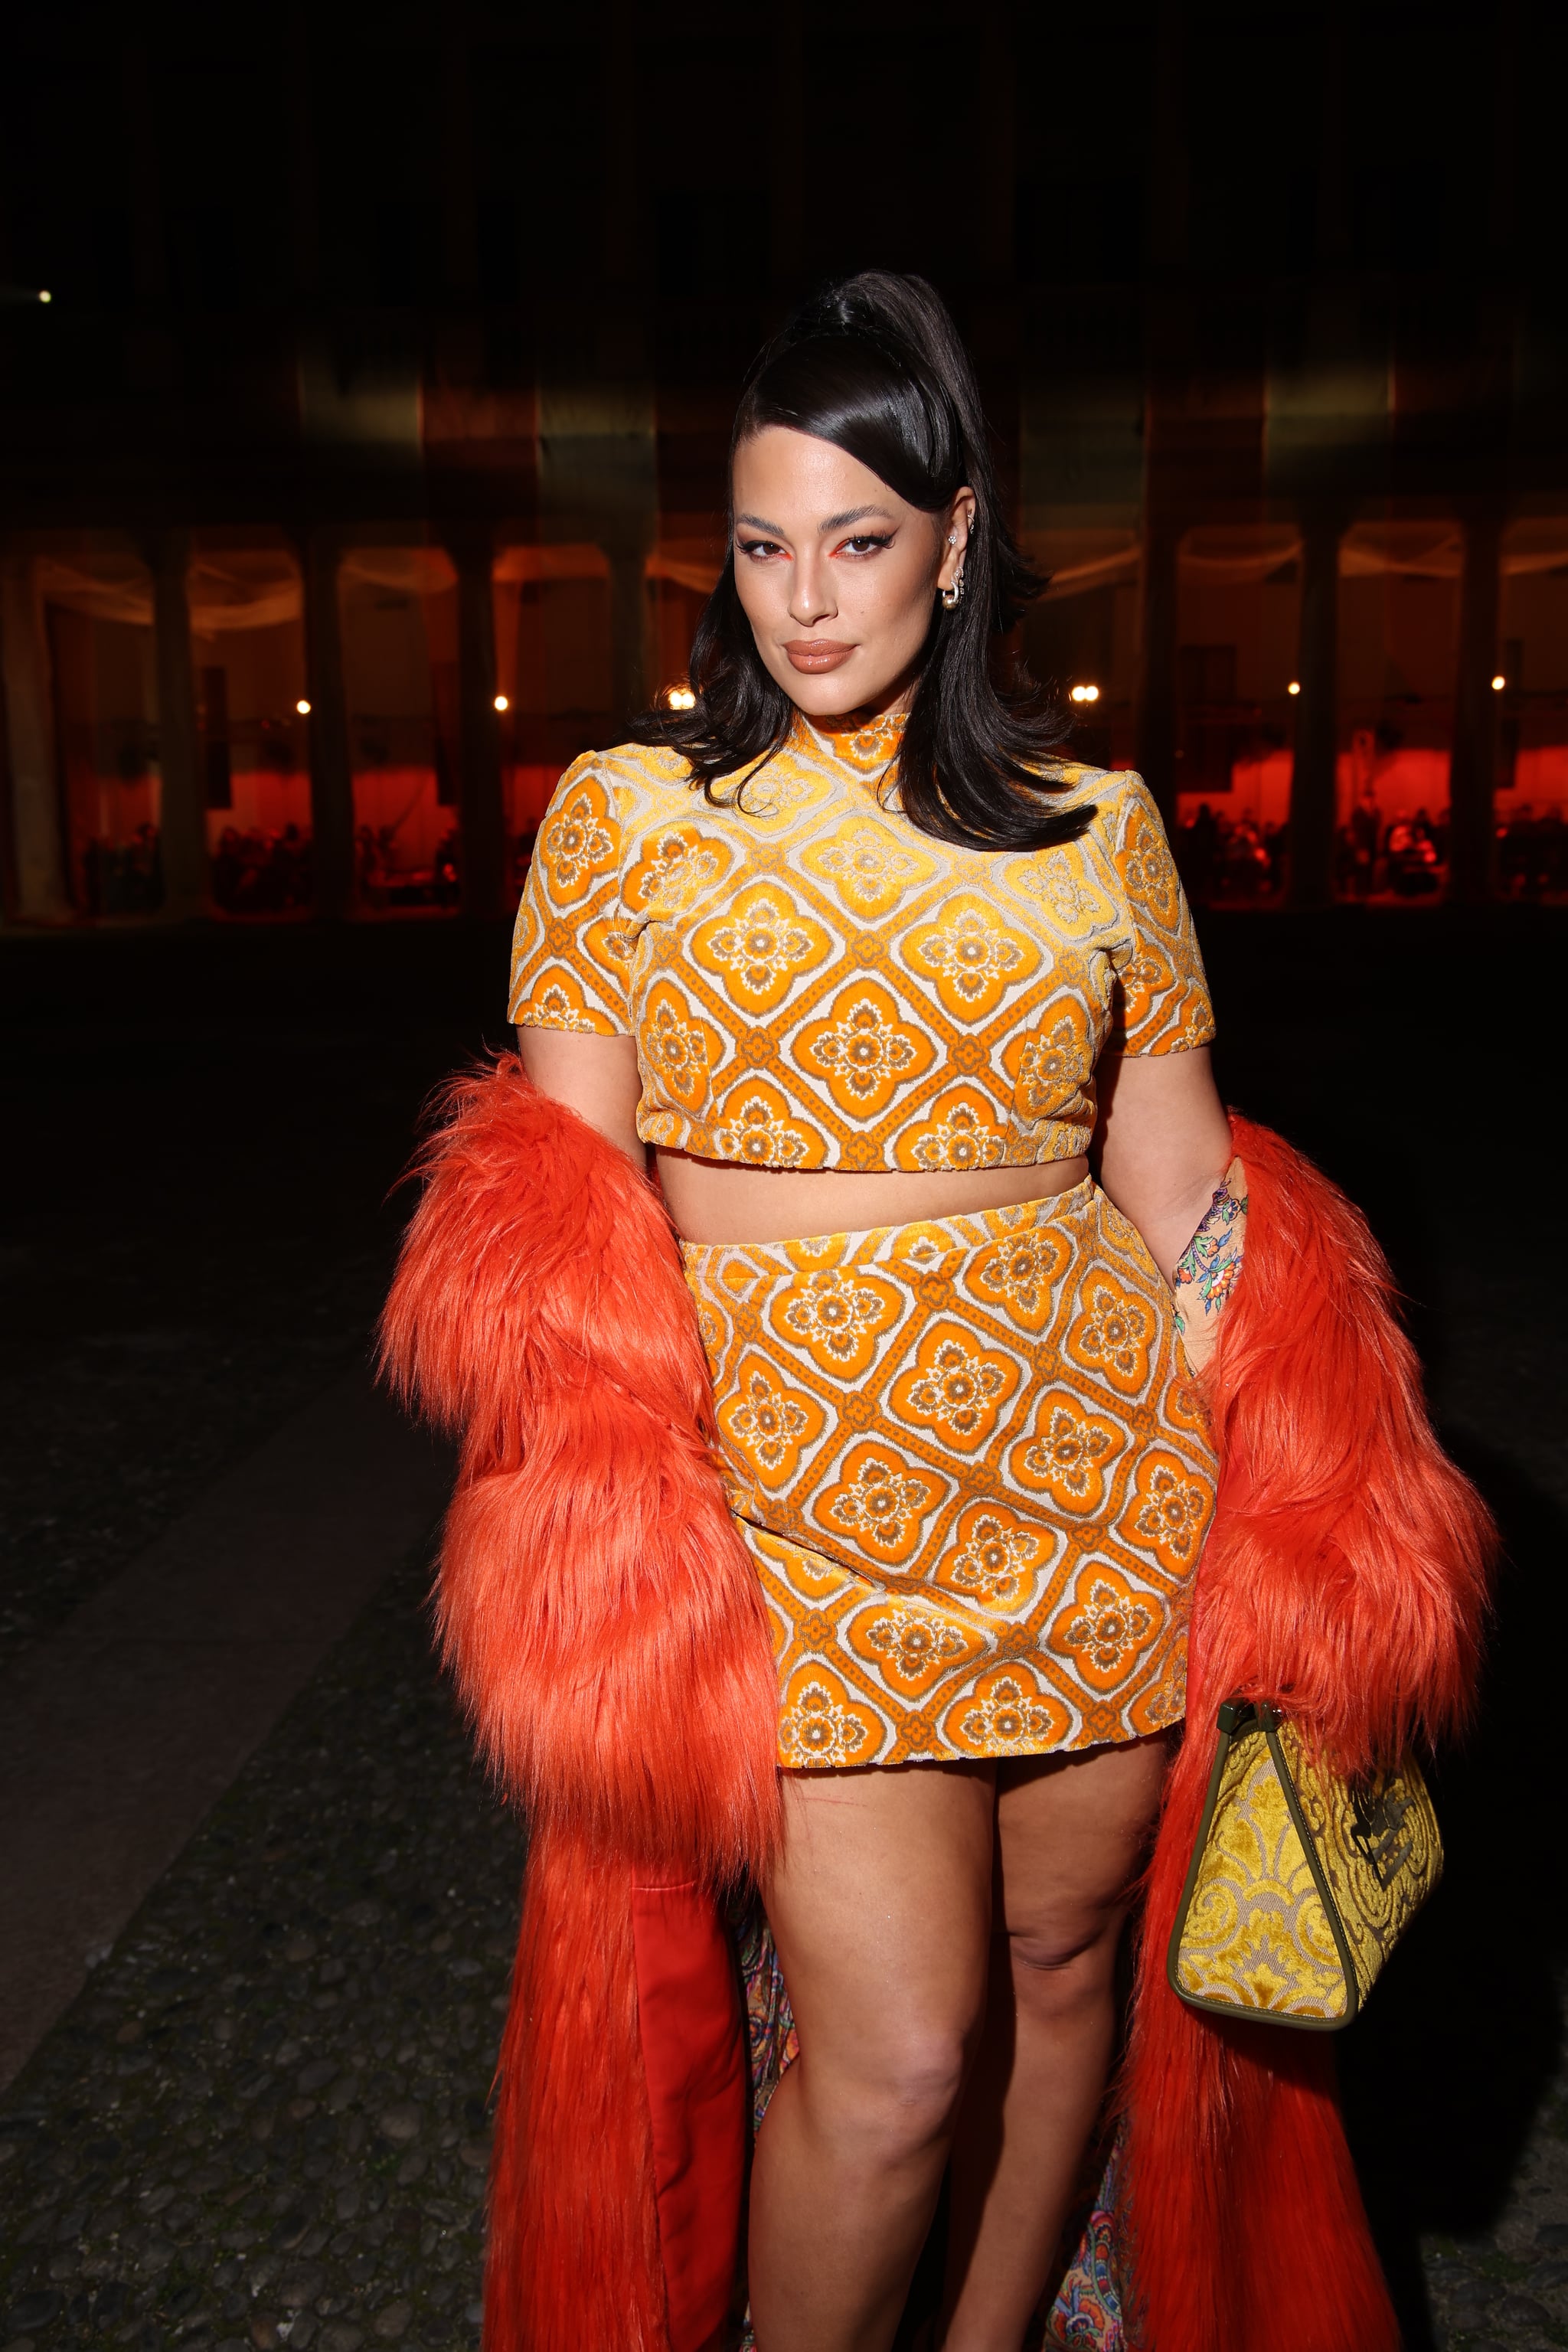 MILAN, ITALY - FEBRUARY 22: Ashley Graham is seen on the front row of the Etro fashion show during the Milan Fashion Week Womenswear Fall/Winter 2023/2024 on February 22, 2023 in Milan, Italy. (Photo by Daniele Venturelli/WireImage)